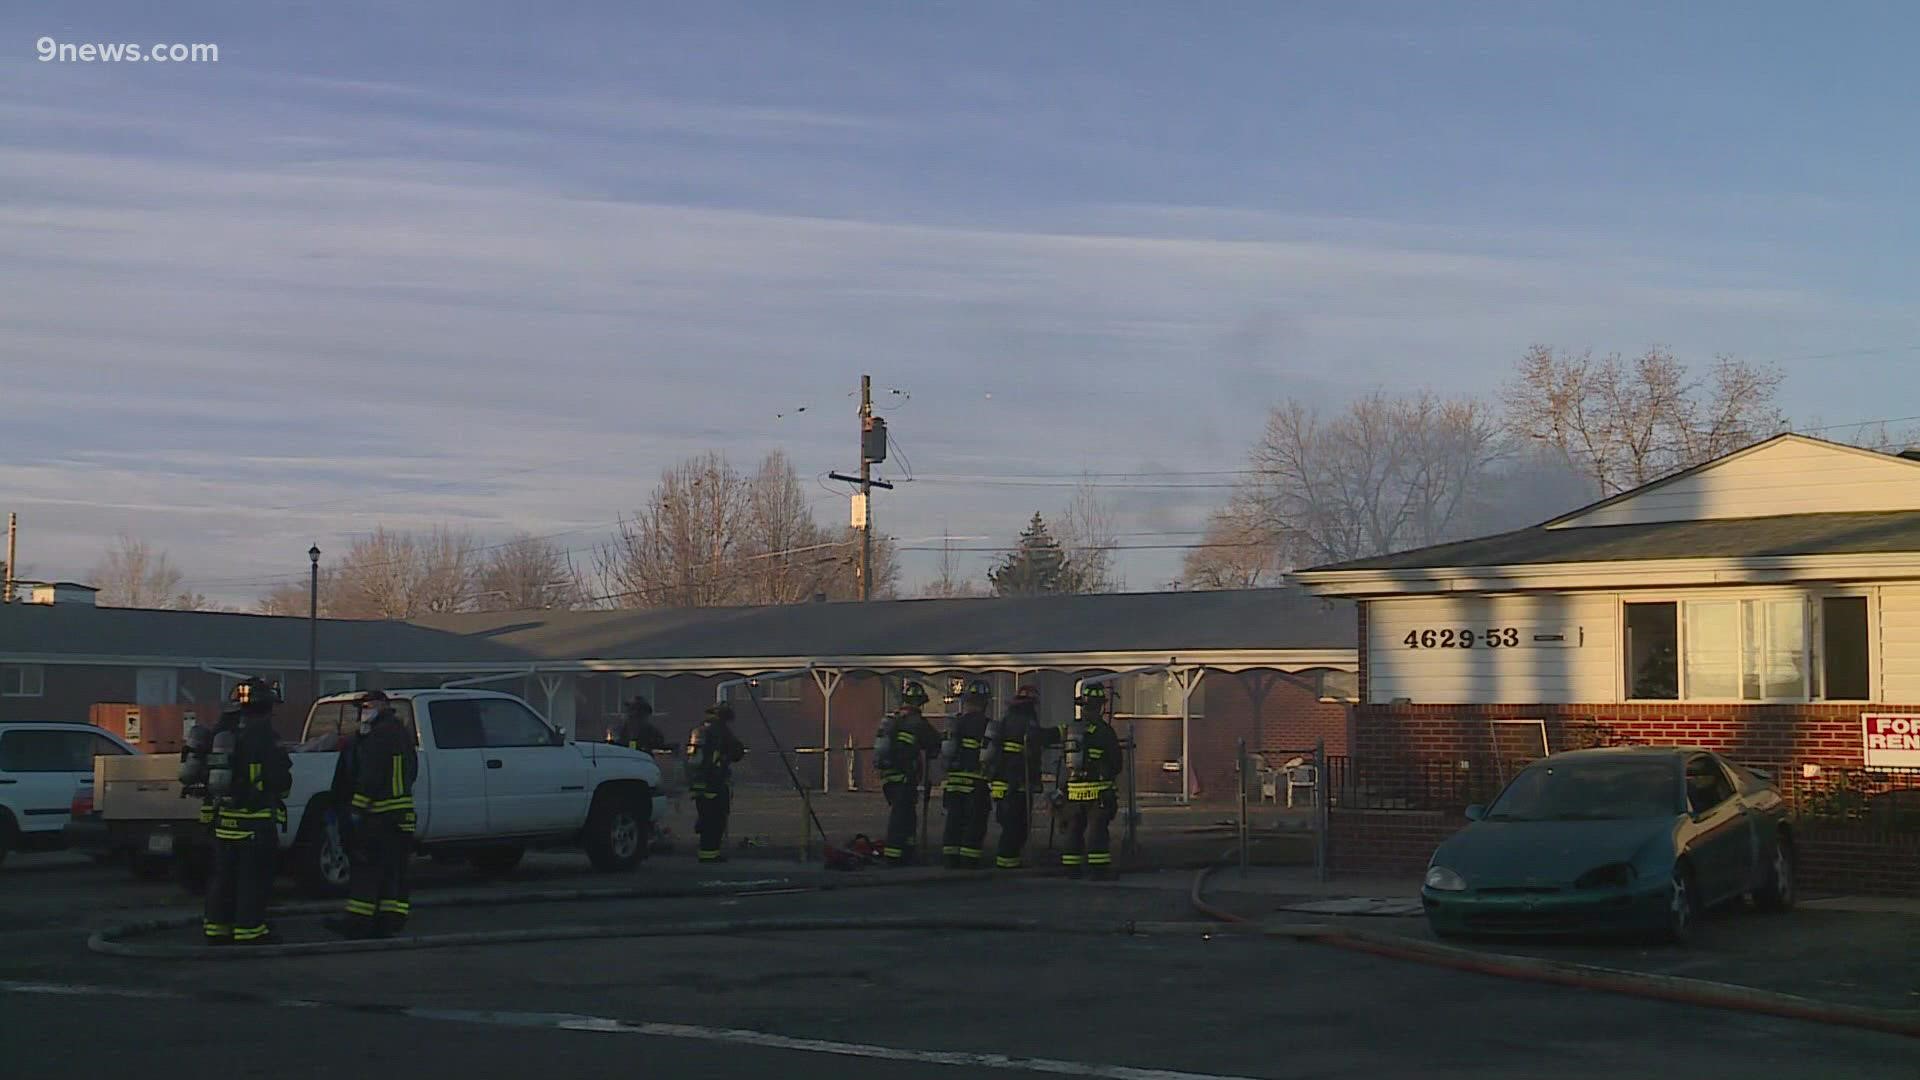 An early morning basement fire Wednesday in a Wheat Ridge apartment building left five units uninhabitable. The cause of the blaze is under investigation.